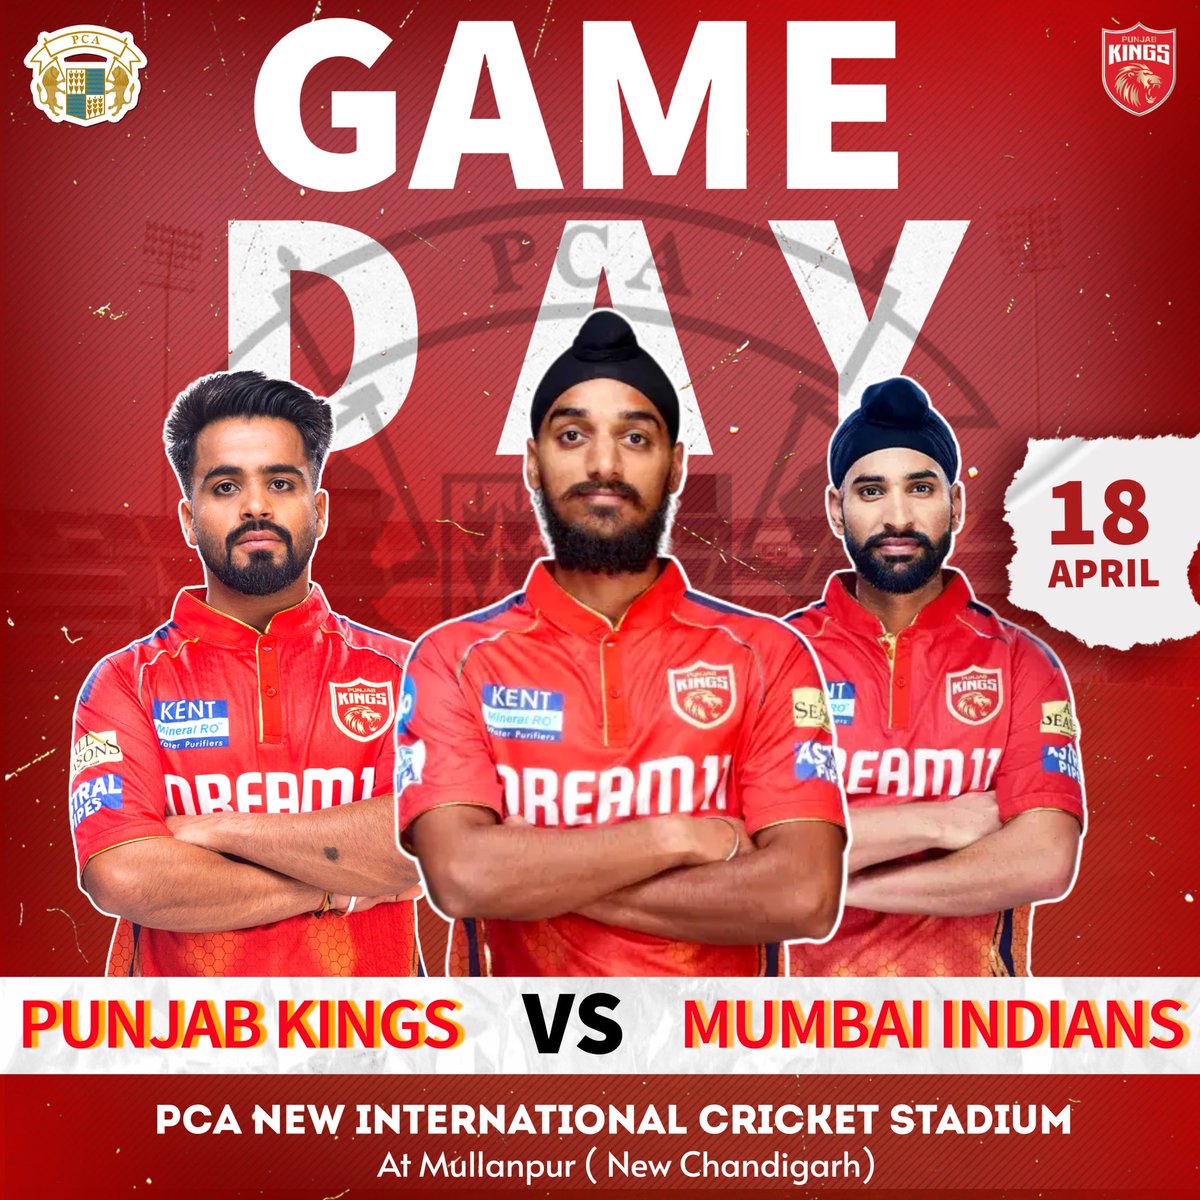 It's Game Day: It is April 18 and time to head straight to the PCA International Cricket Stadium in Mullanpur. Watch Punjab Kings vs Mumbai Indians live in action!